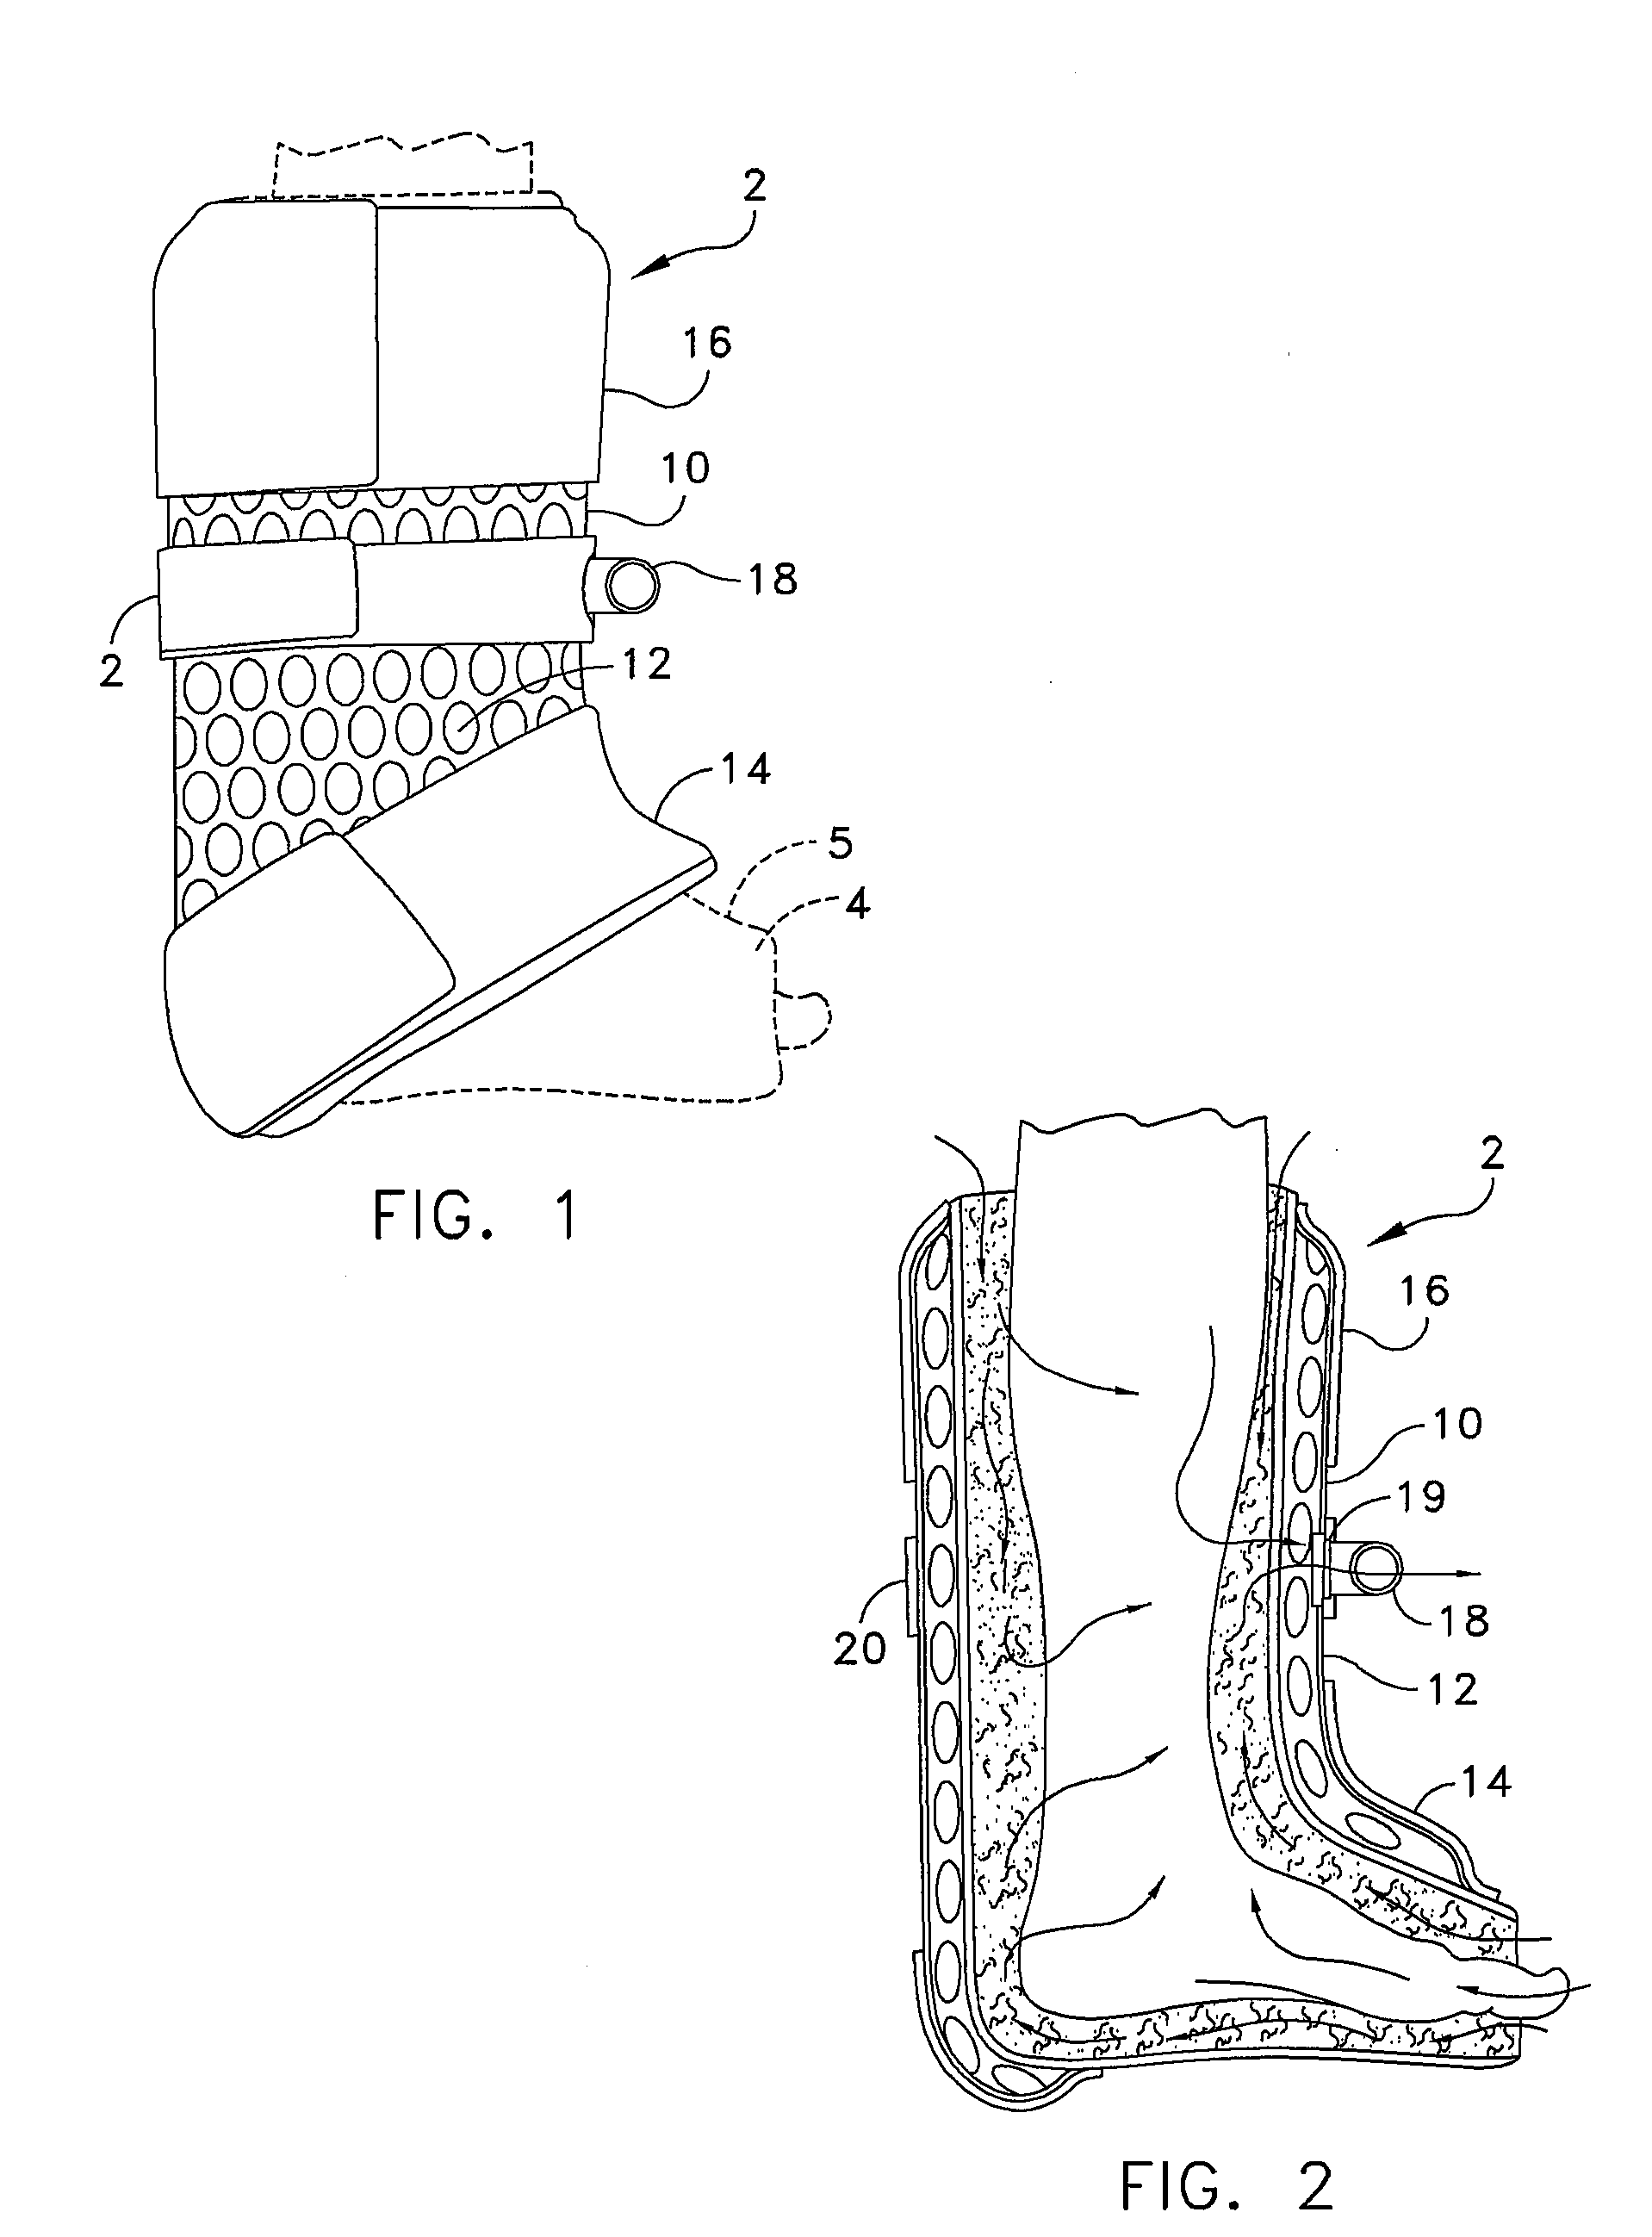 Apparatus and method of creating airflow through a breathable orthopedic cast